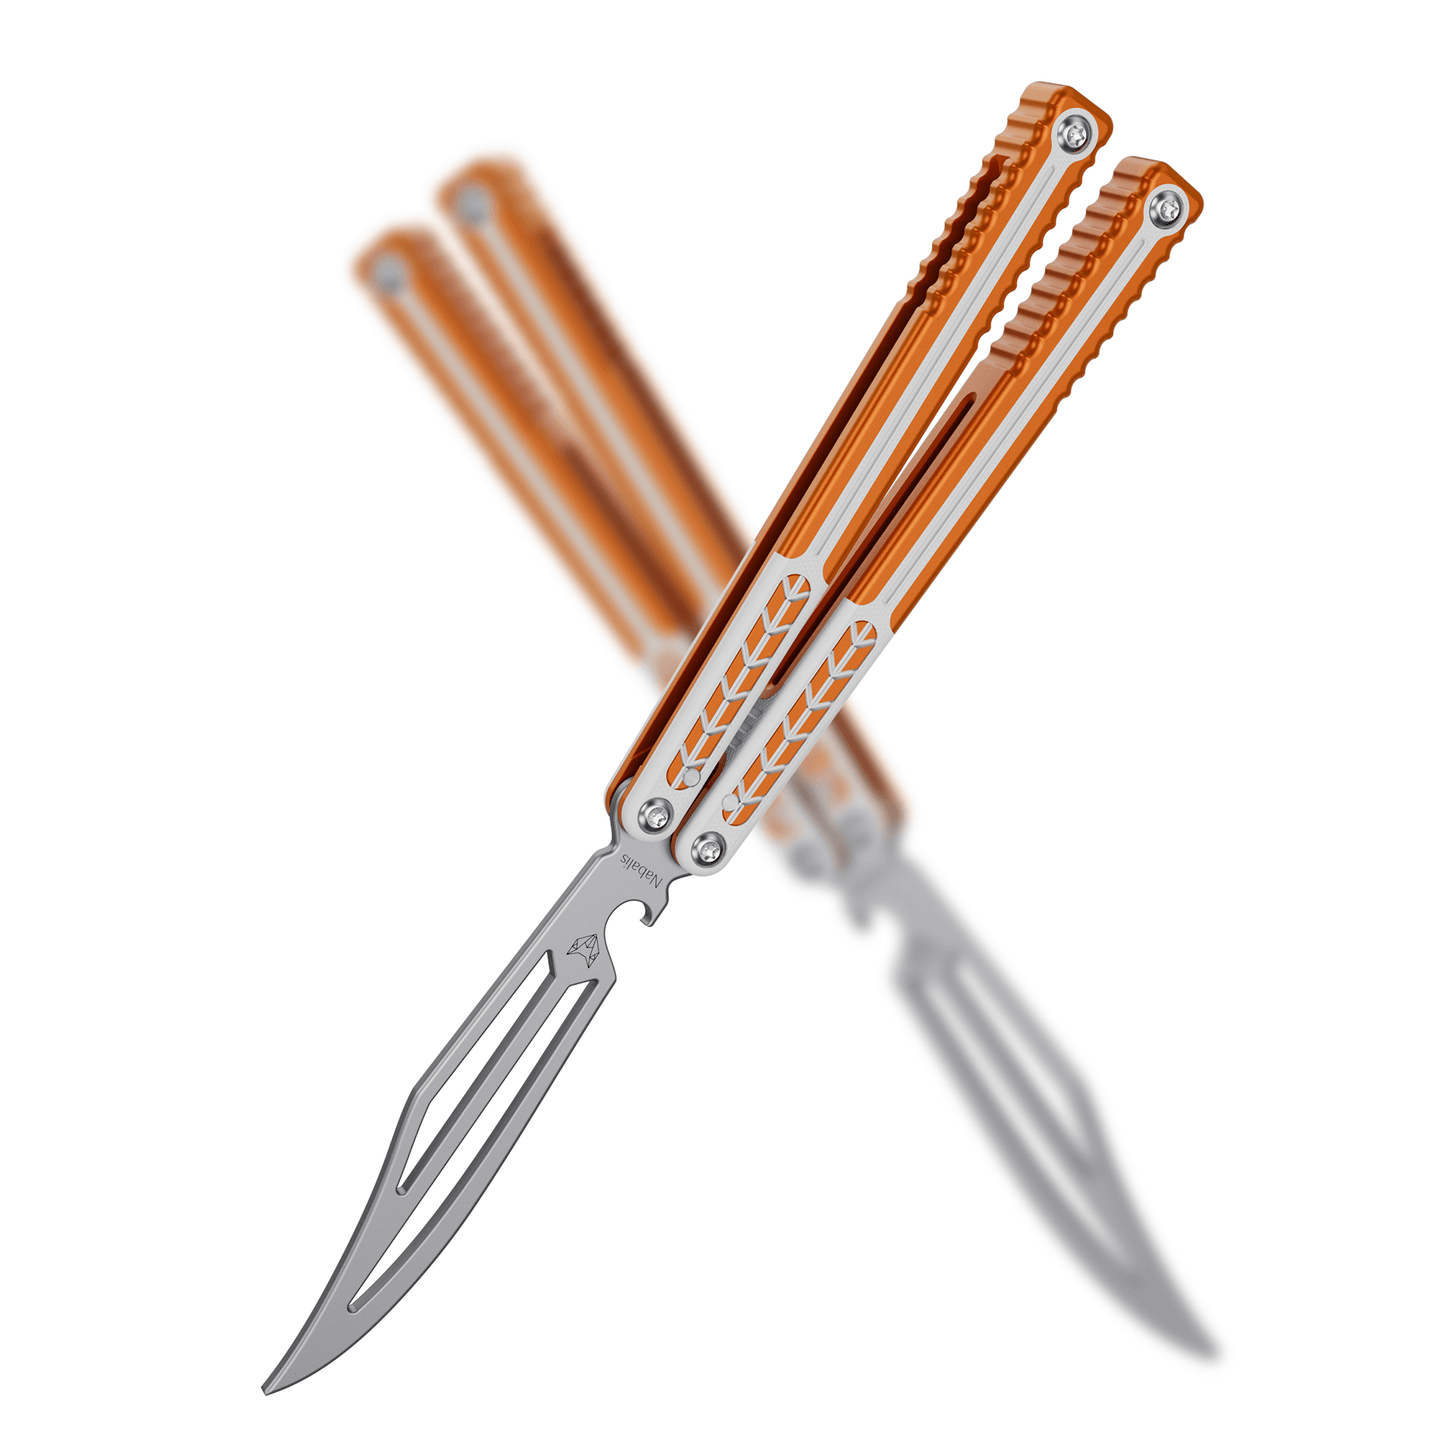 Nabalis Vulp Pro Balisong Butterfly Knife Trainer-Orange